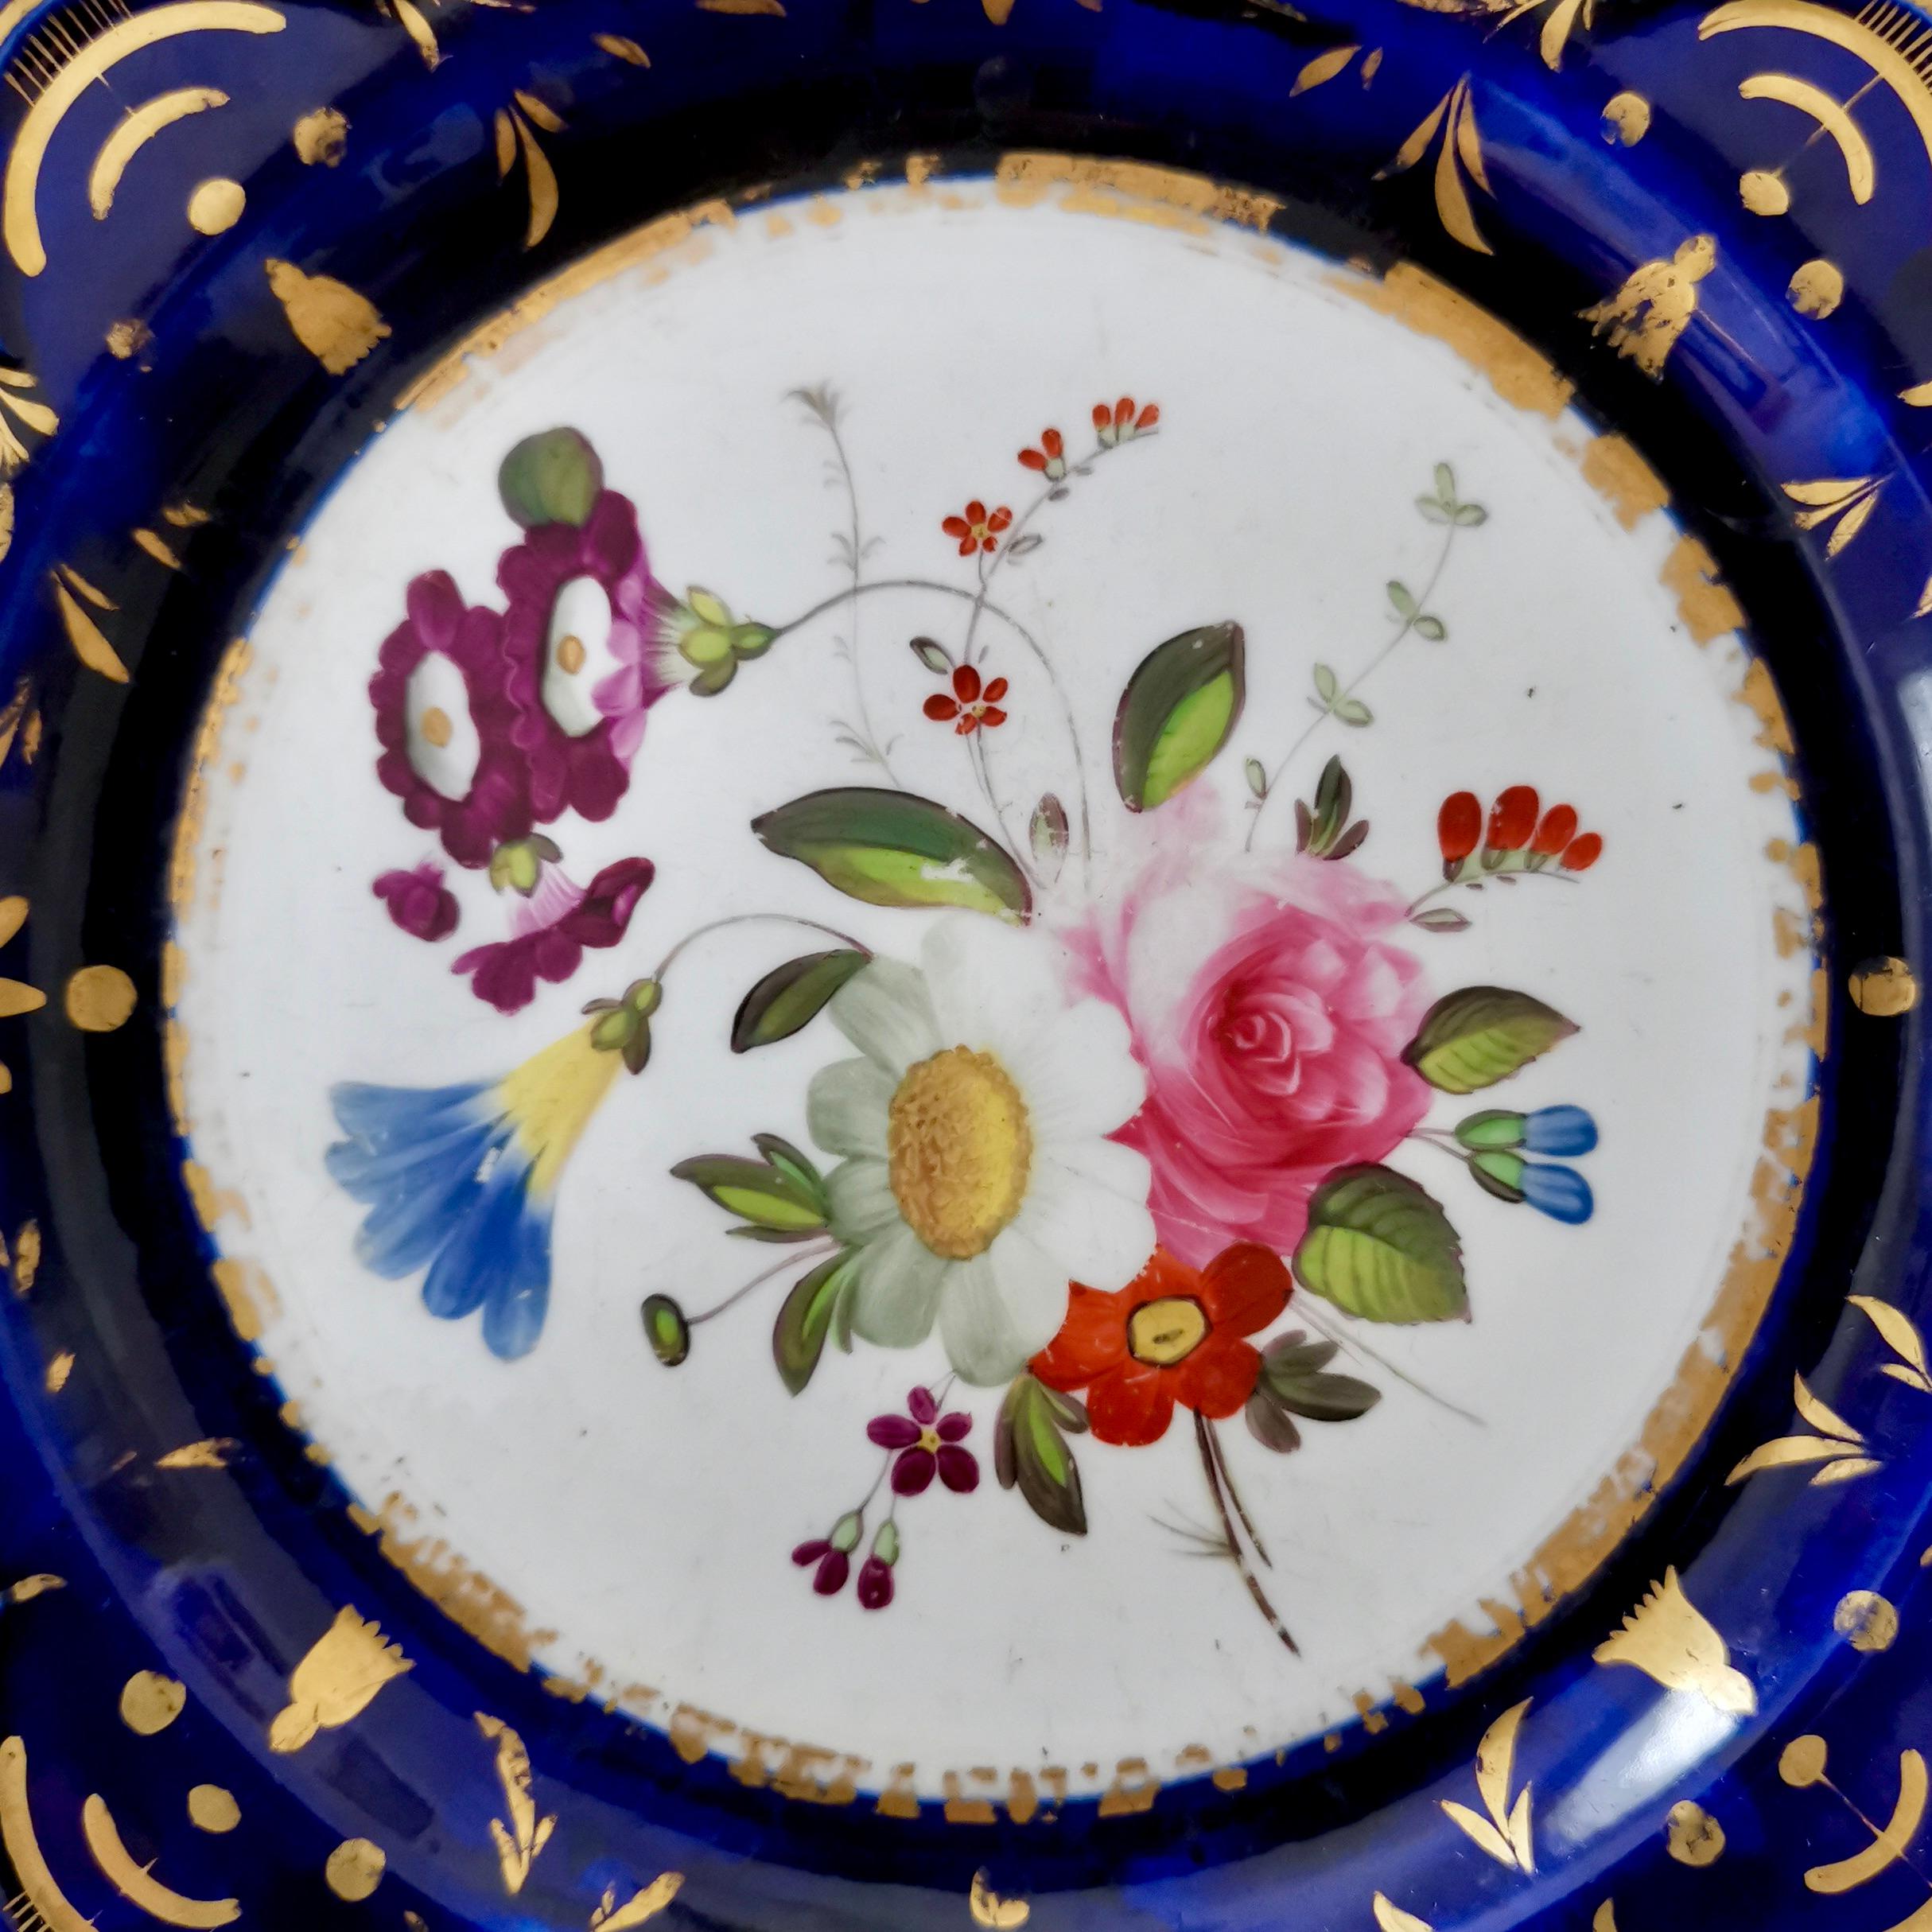 This is a beautiful dessert plate made by Machin circa 1825, which is known as the Regency period. The plate has the famous 